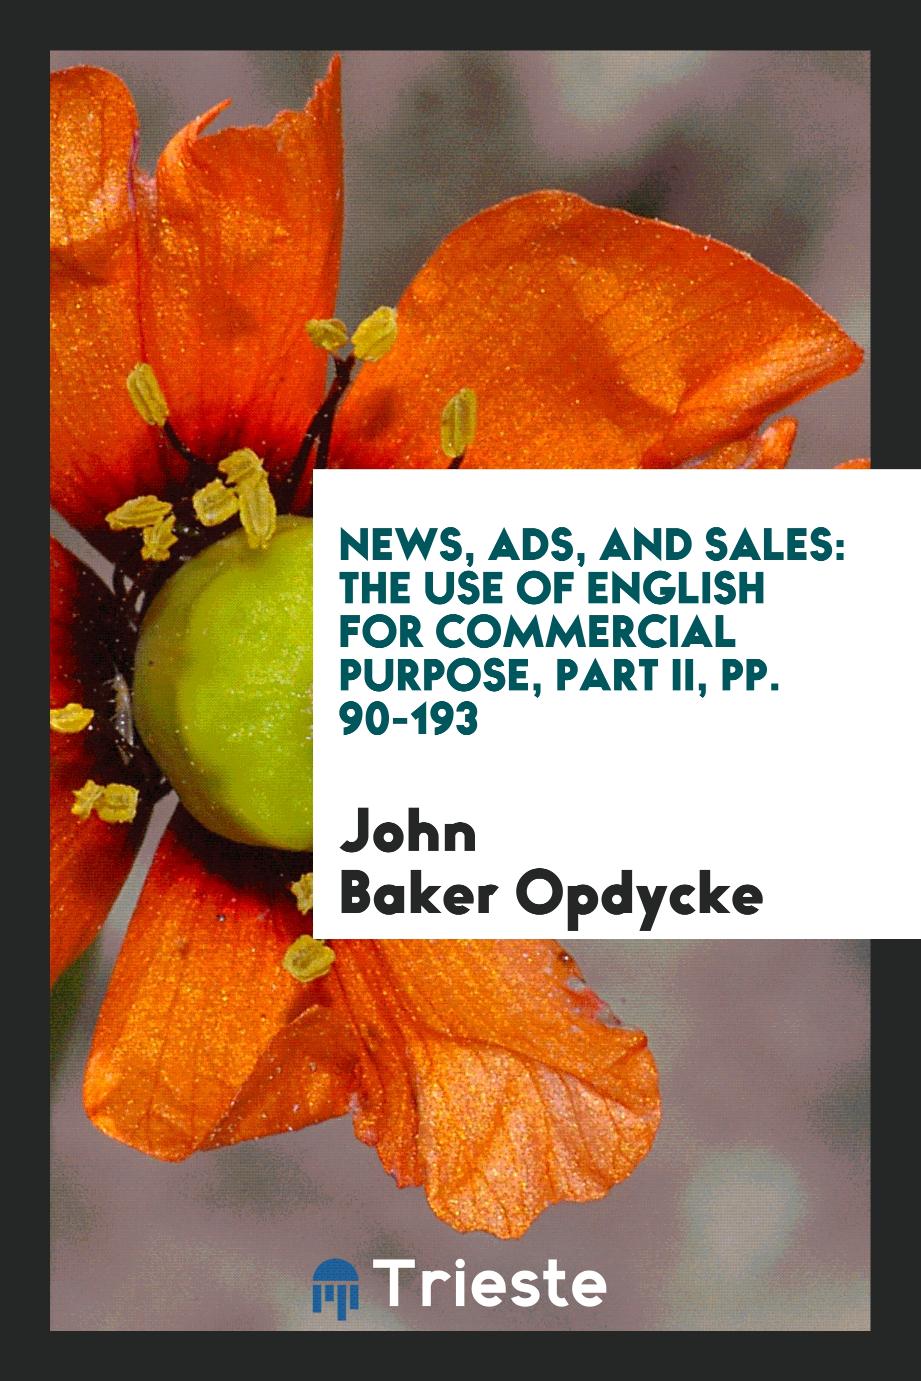 News, Ads, and Sales: The Use of English for Commercial Purpose, Part II, pp. 90-193